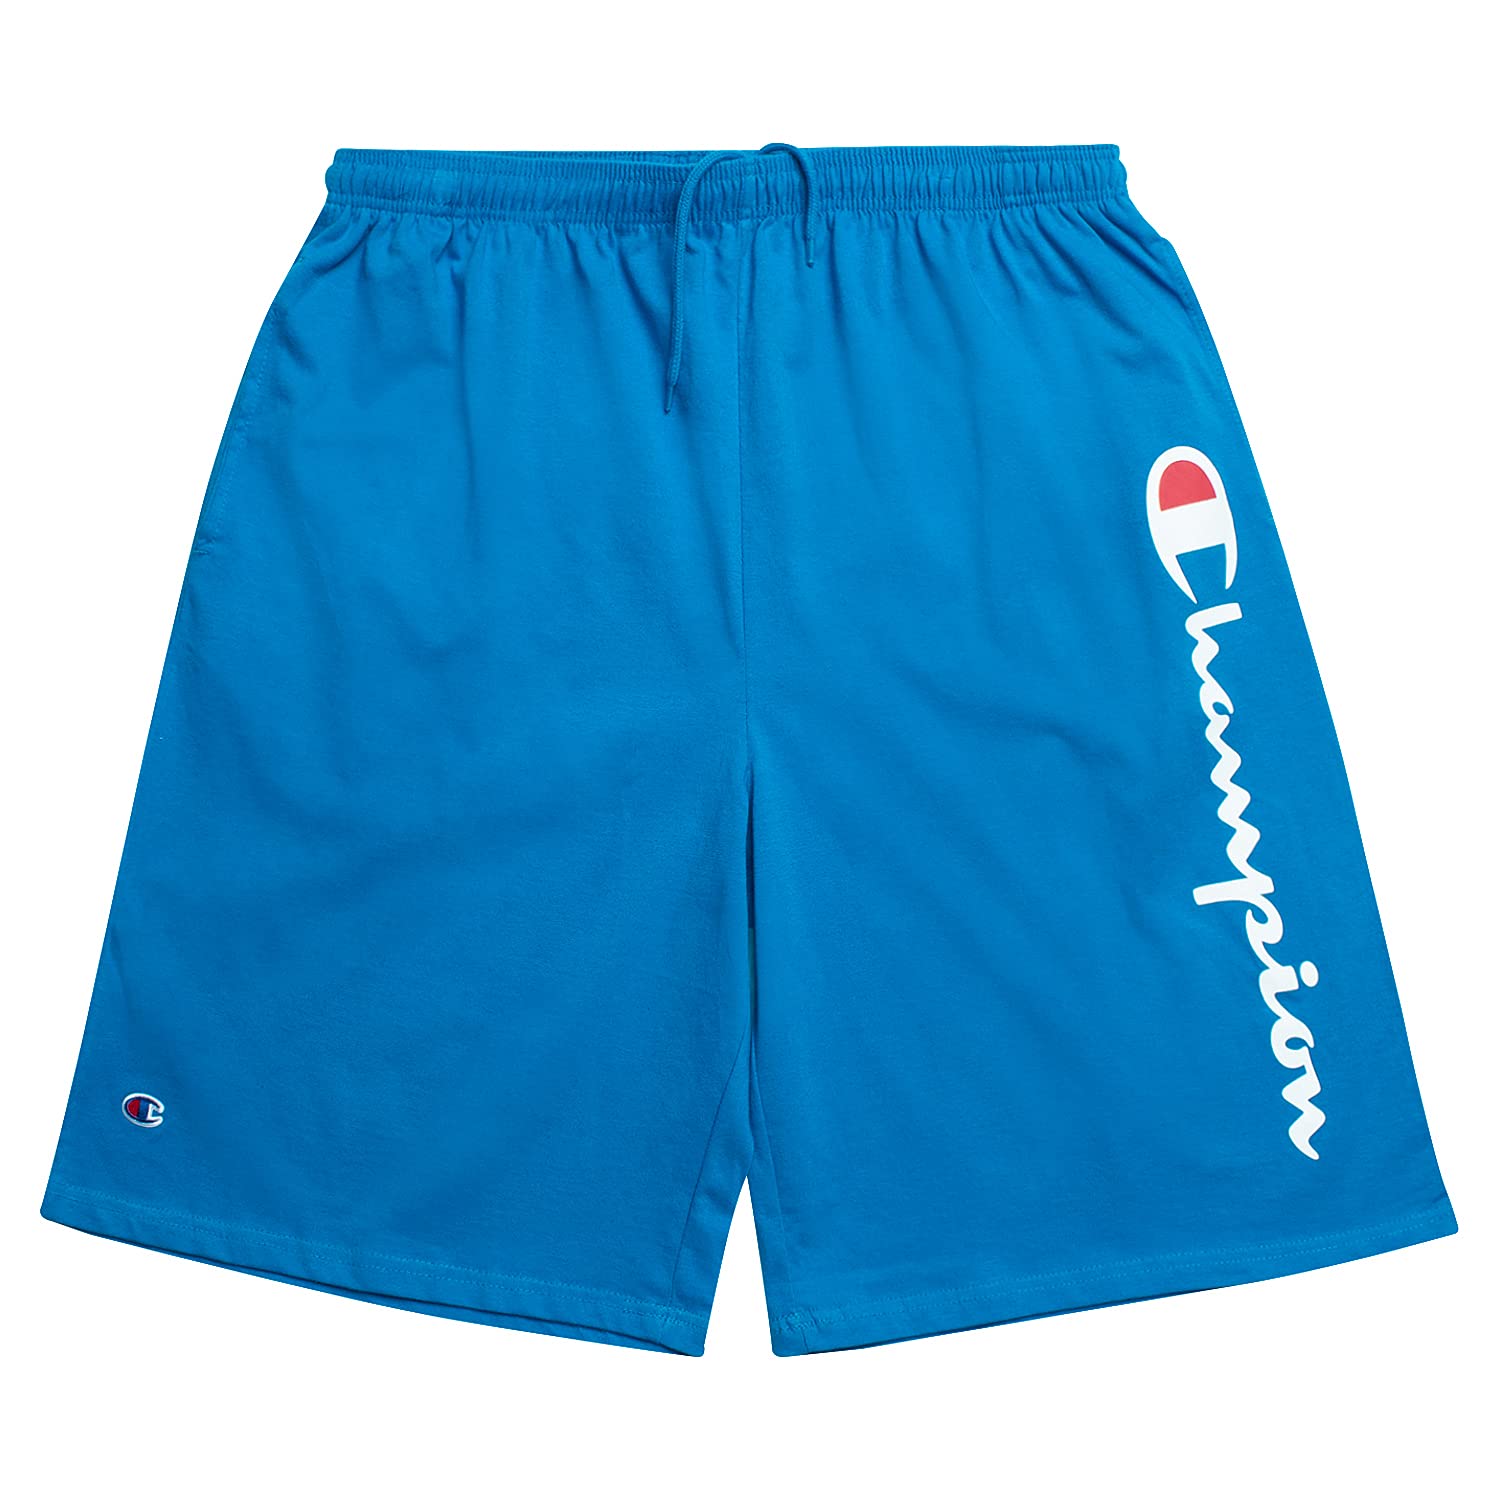 Champion Mens Big and Tall Lightweight Cotton Jersey Shorts with Script Logo